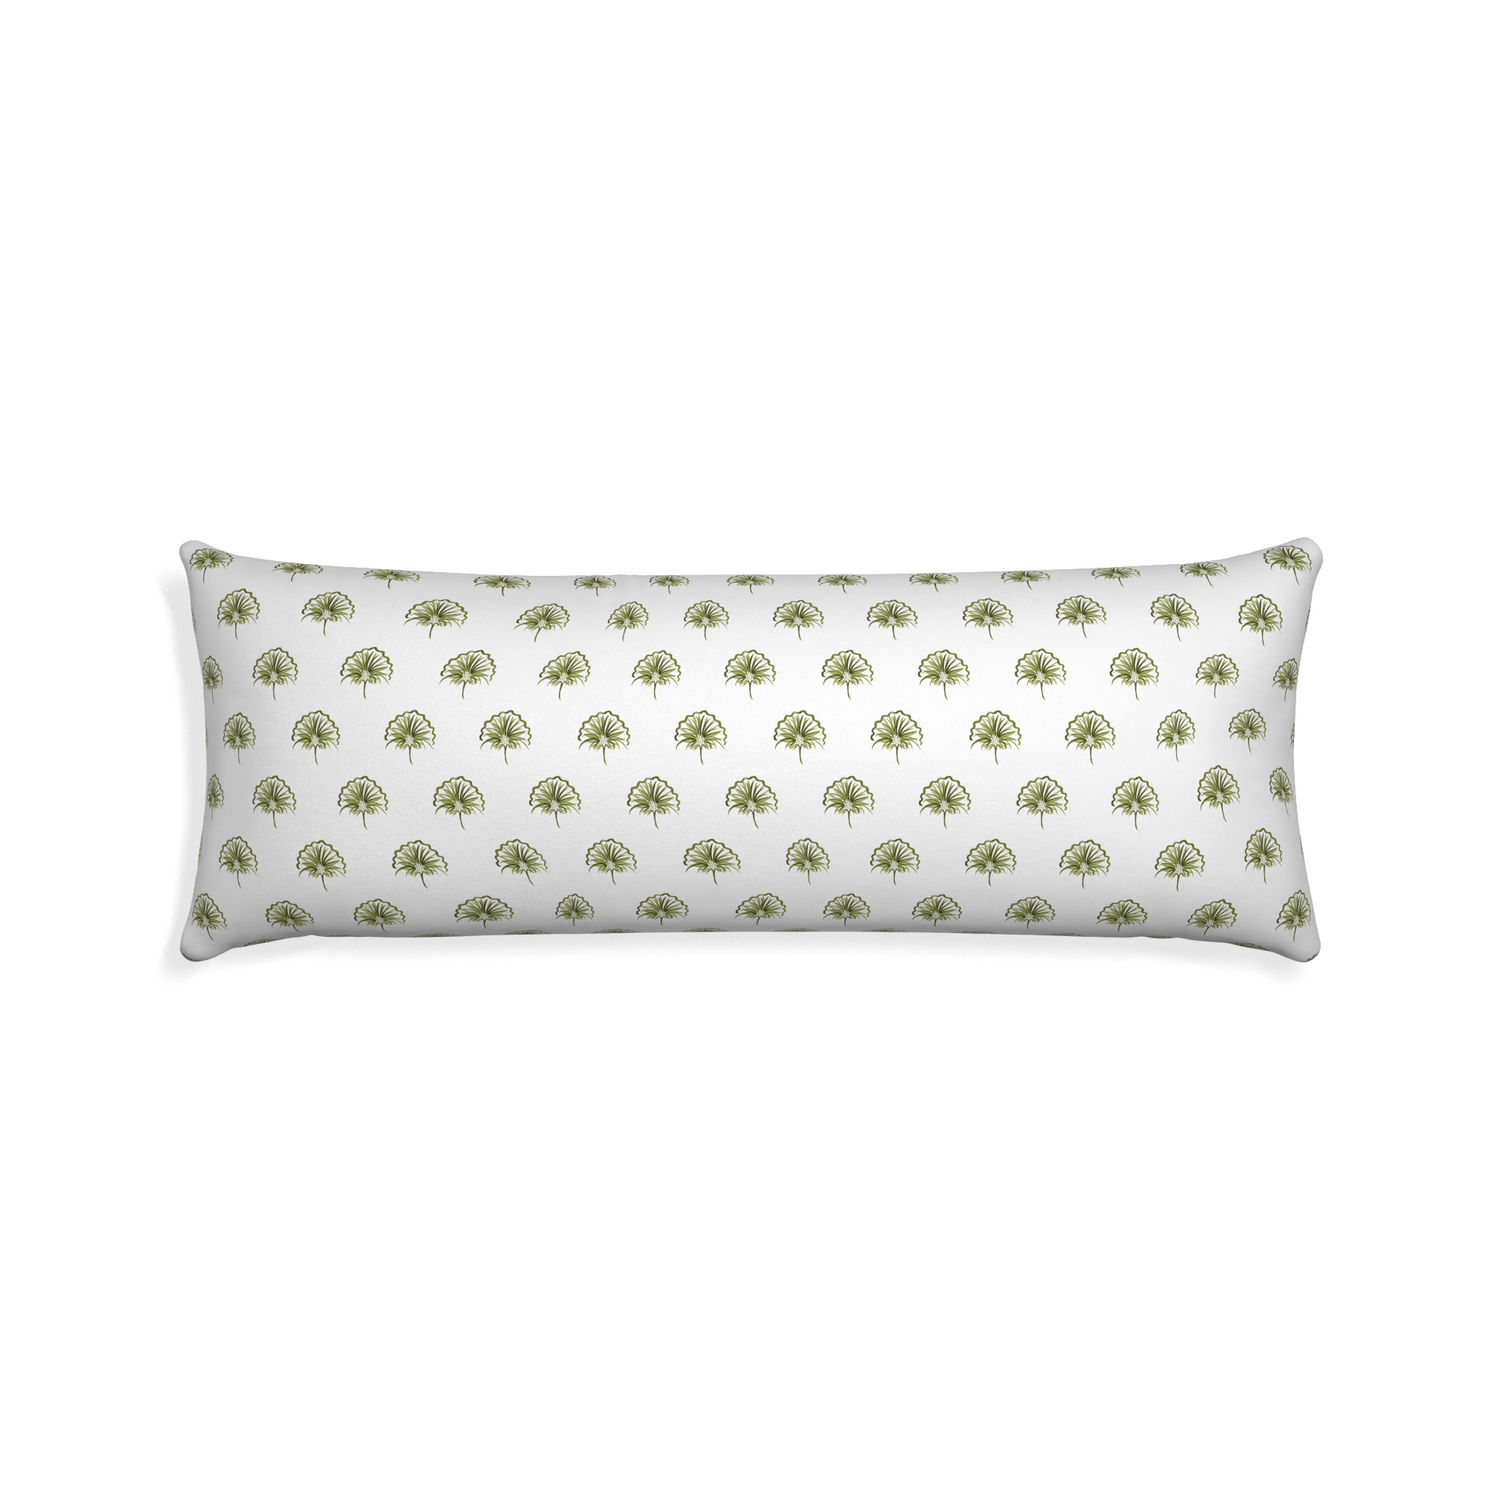 Xl-lumbar penelope moss custom green floralpillow with none on white background